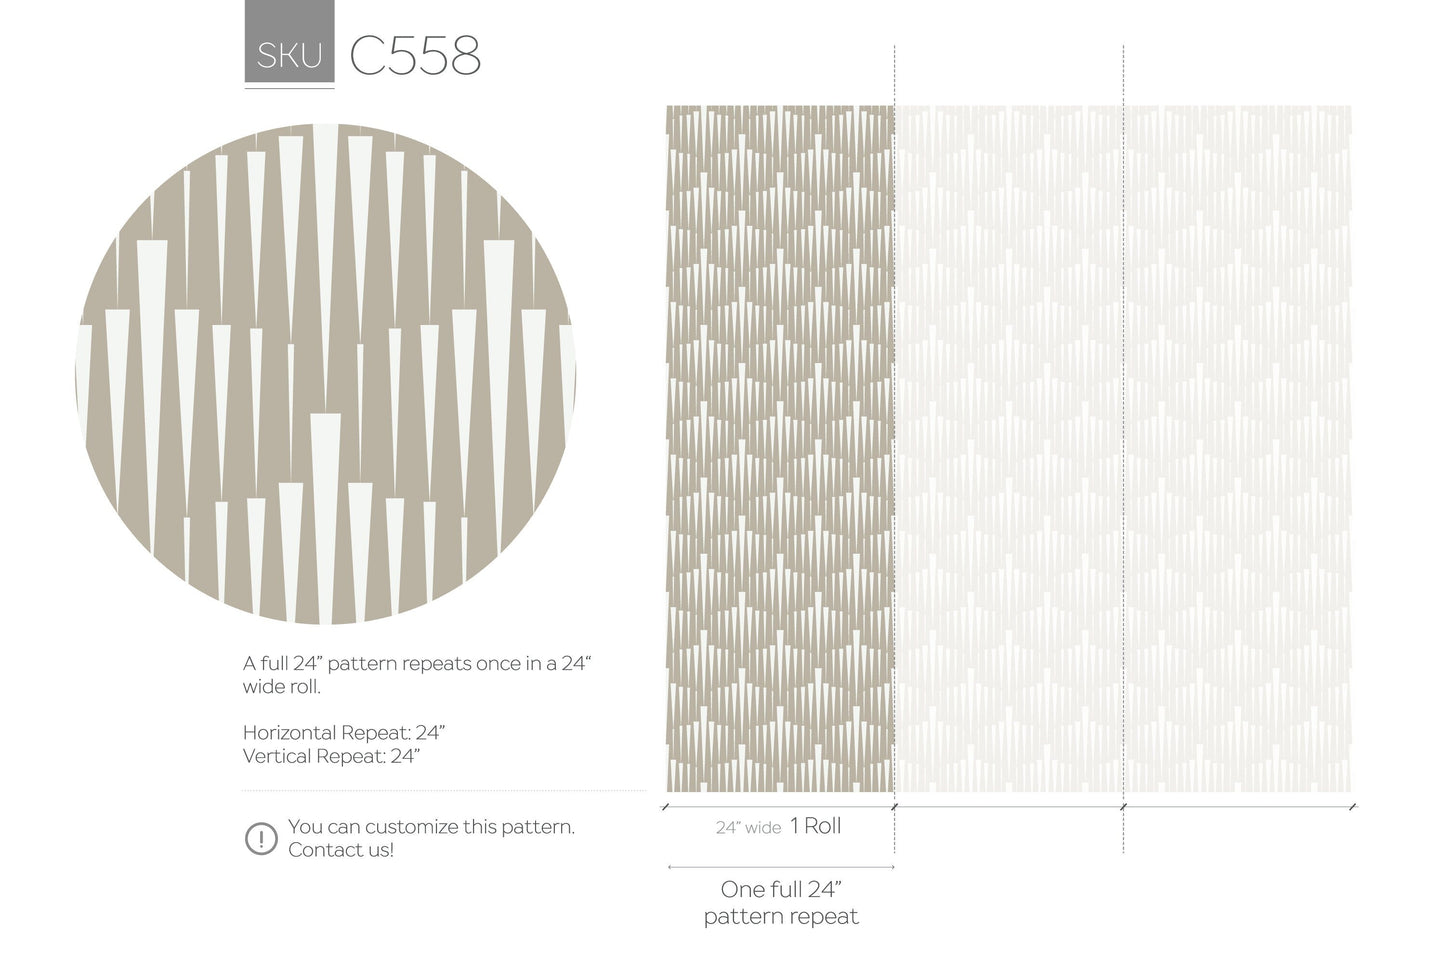 Wallpaper Peel and Stick Wallpaper Removable Wallpaper Home Decor Wall Art Wall Decor Room Decor / White and Beige Geometric Wallpaper- C558